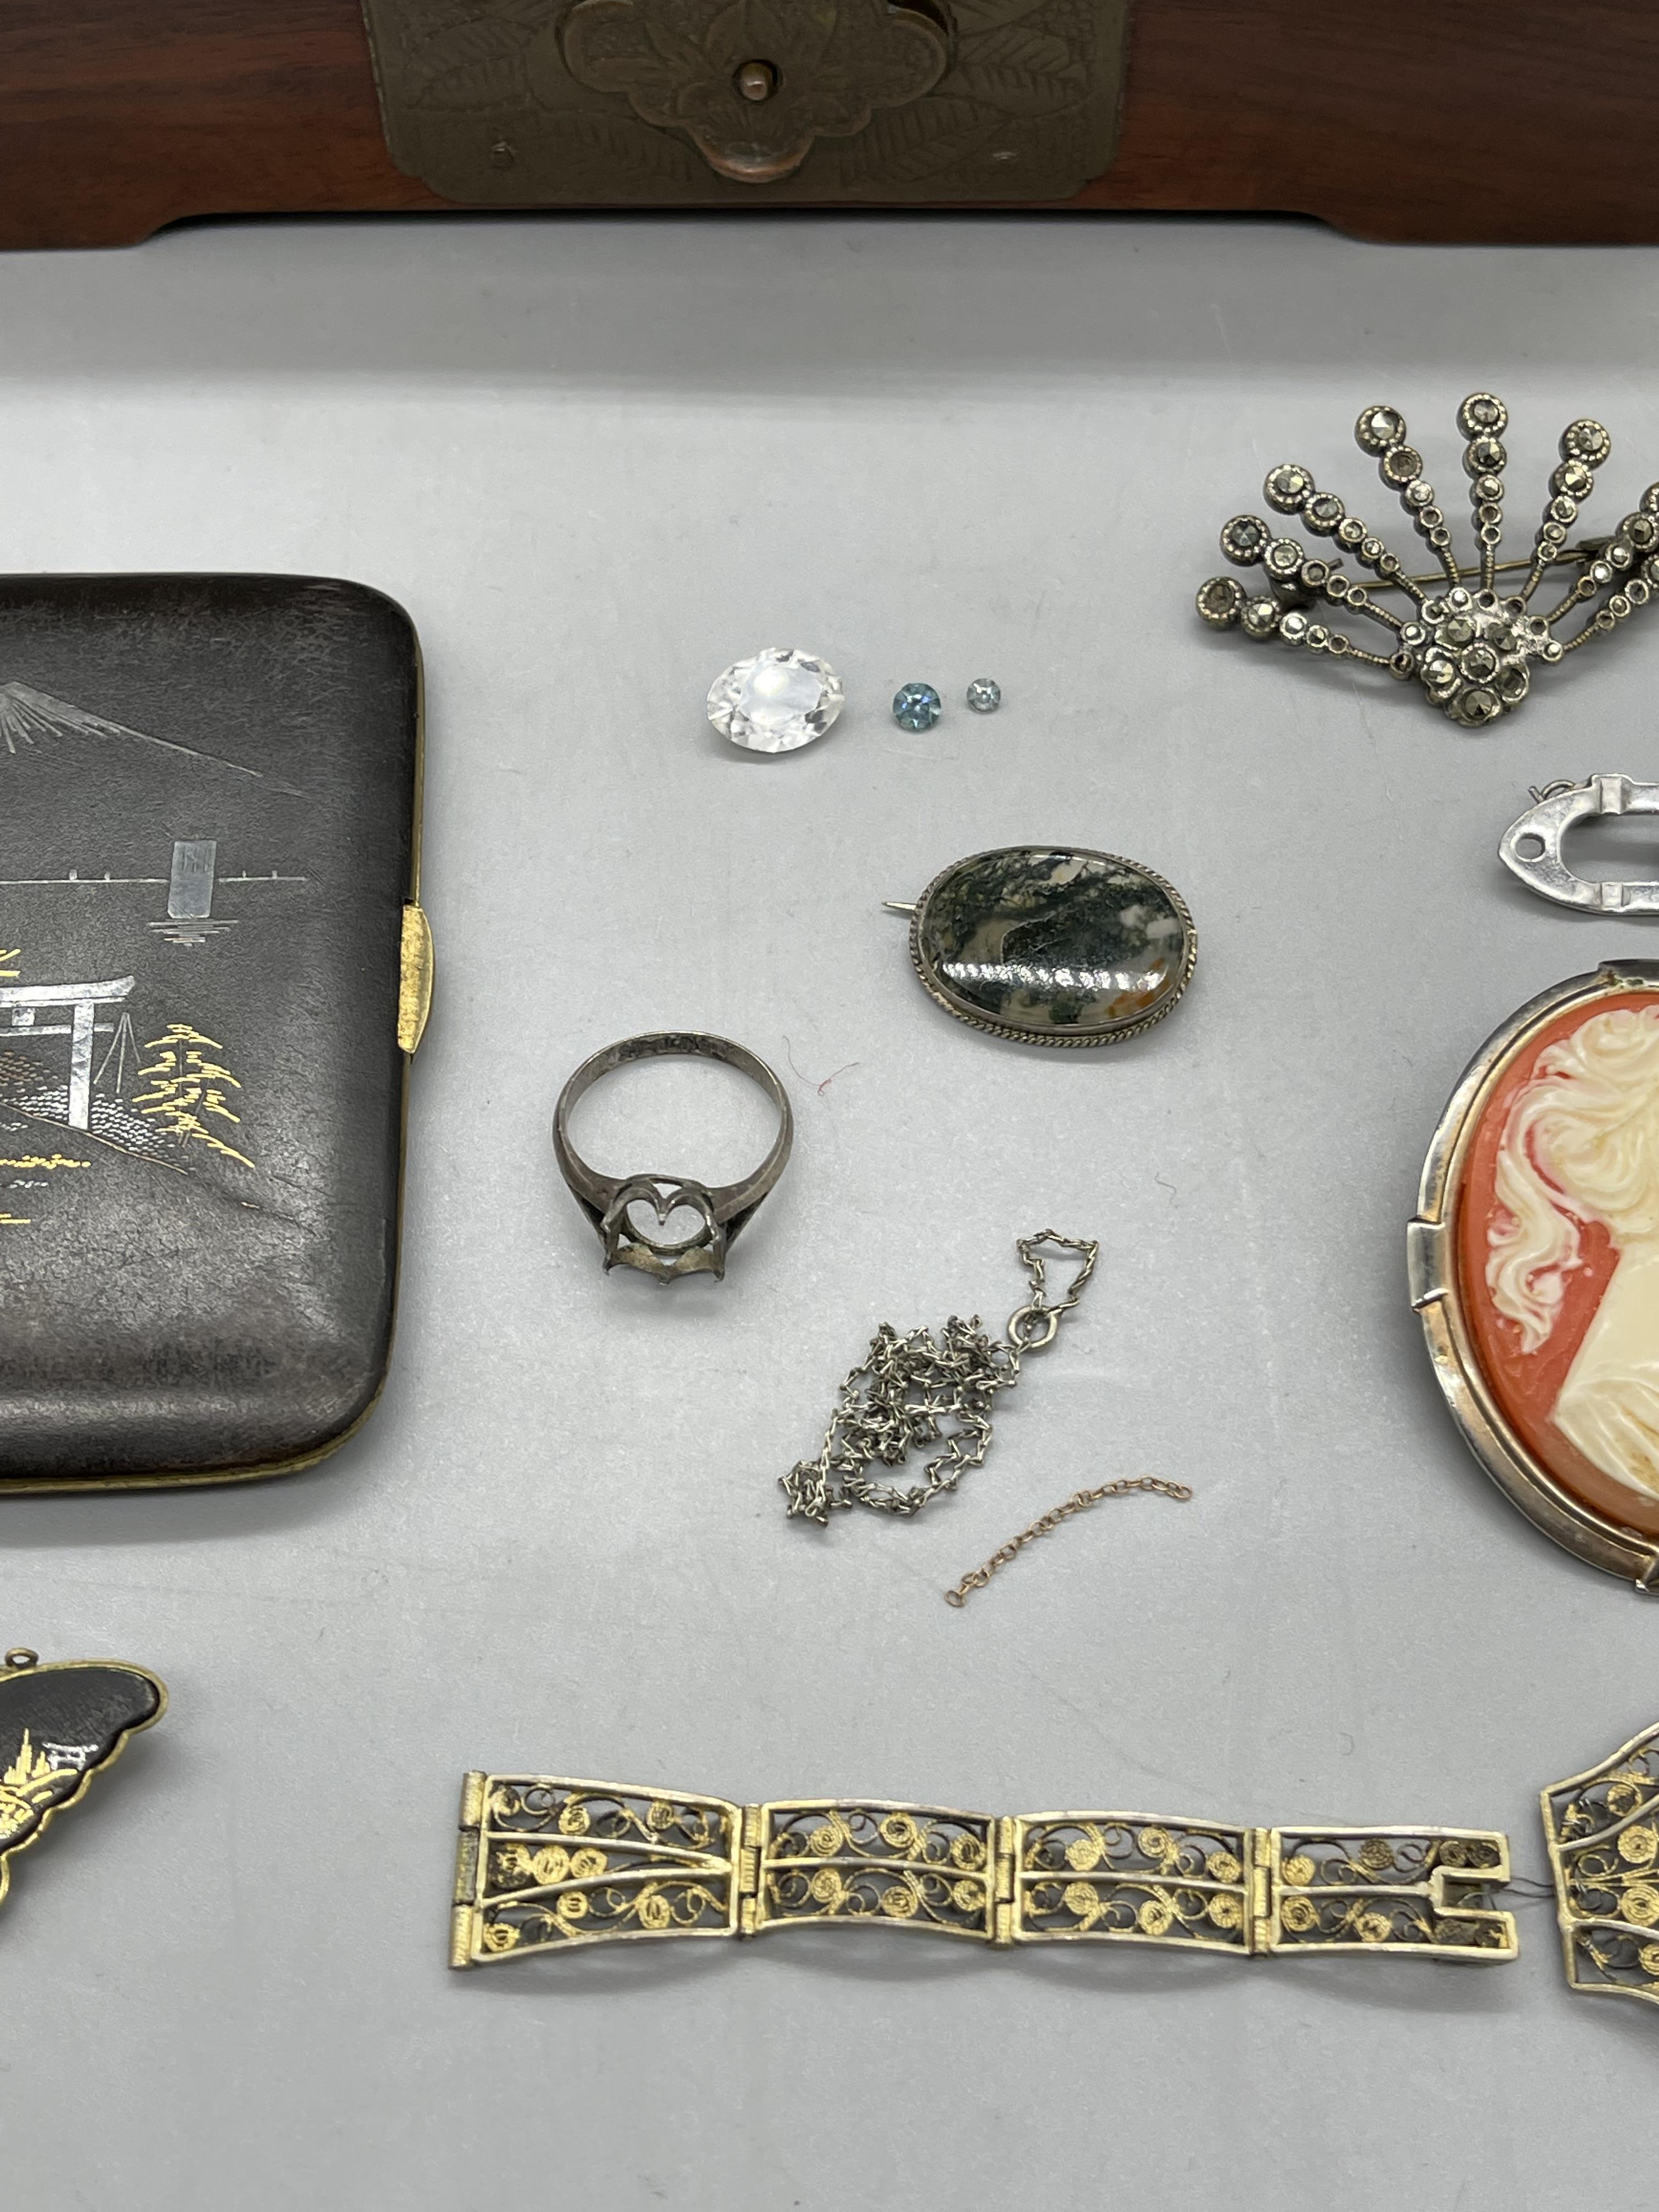 Jewellery box to include Cameo Brooche and Pearls - Image 7 of 10